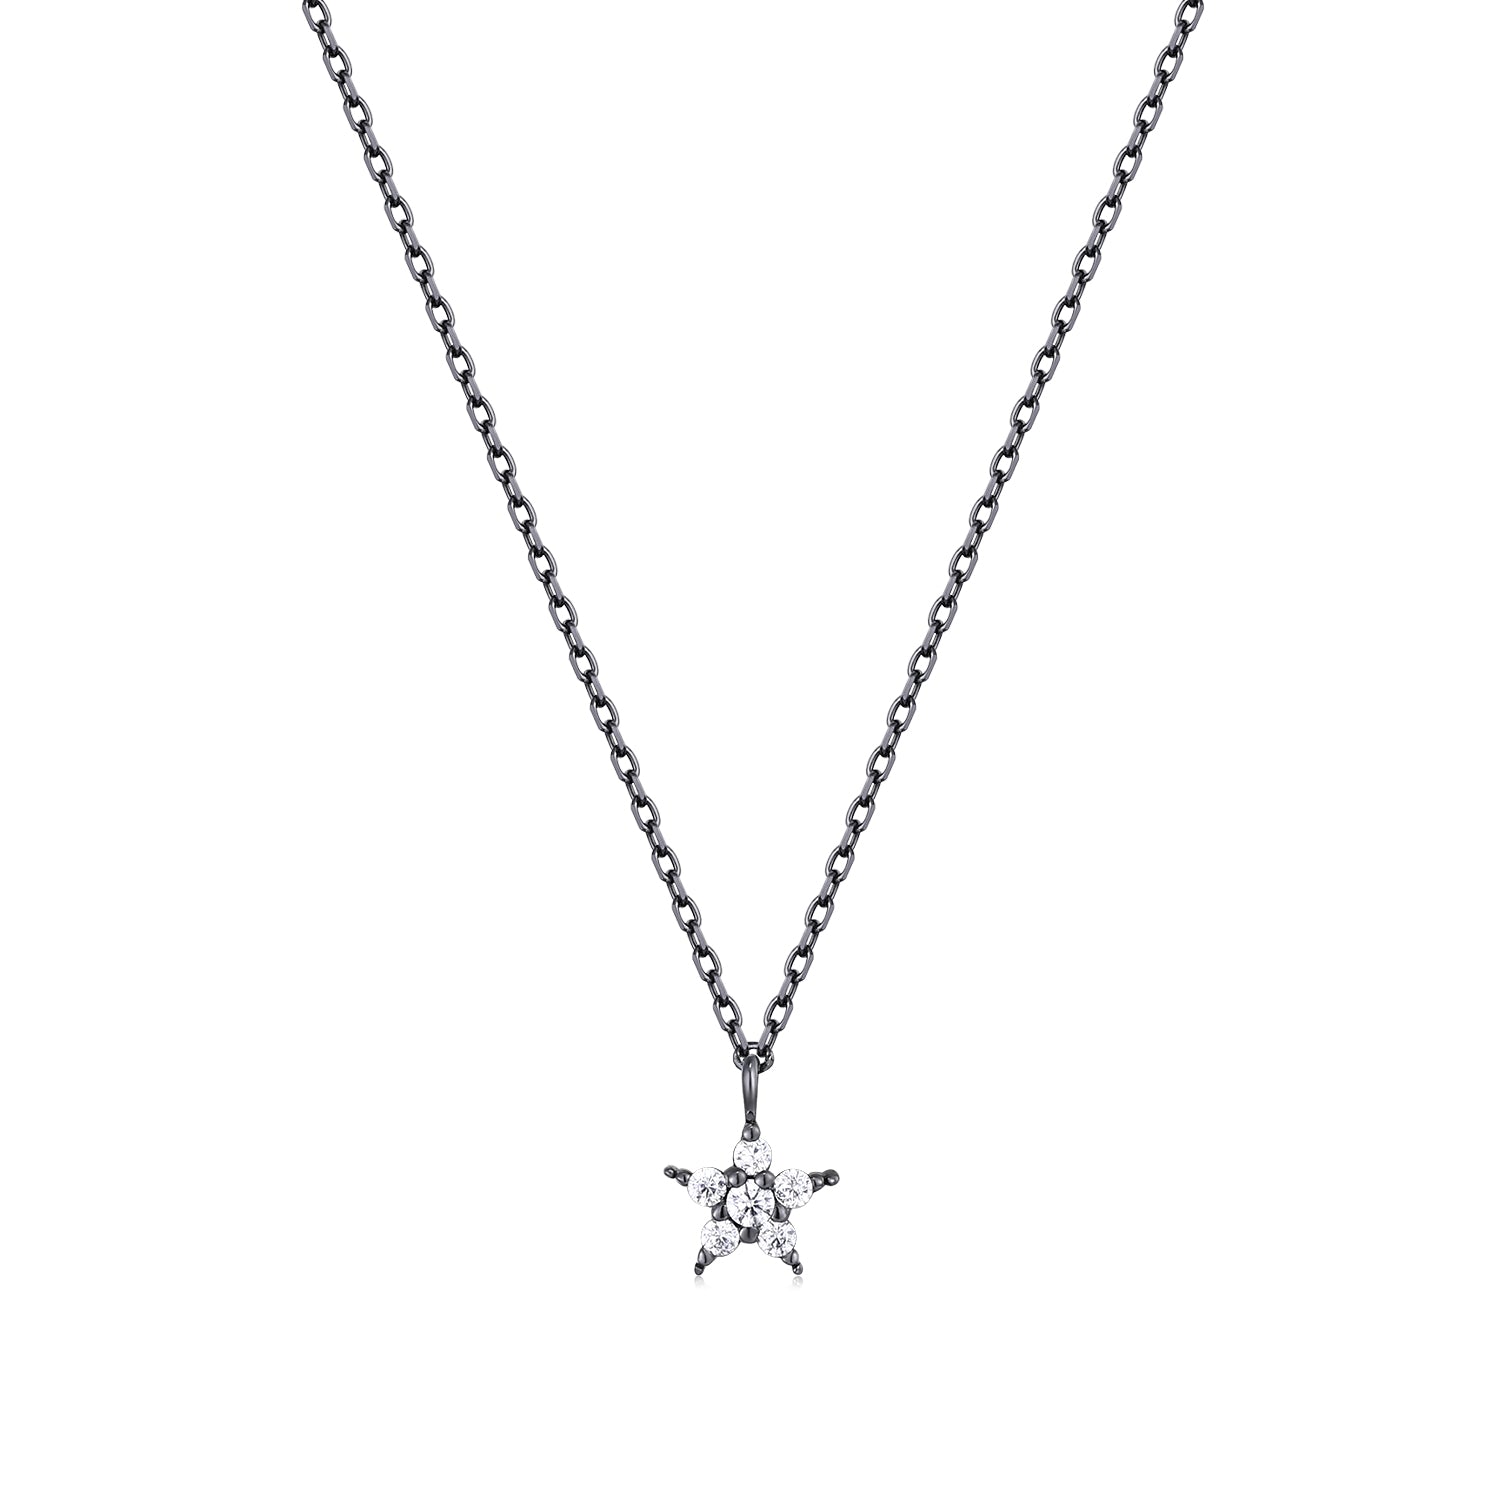 Mellonia | Pawpaw Necklace | White CZ | Black Rhodium Plated 925 Silver